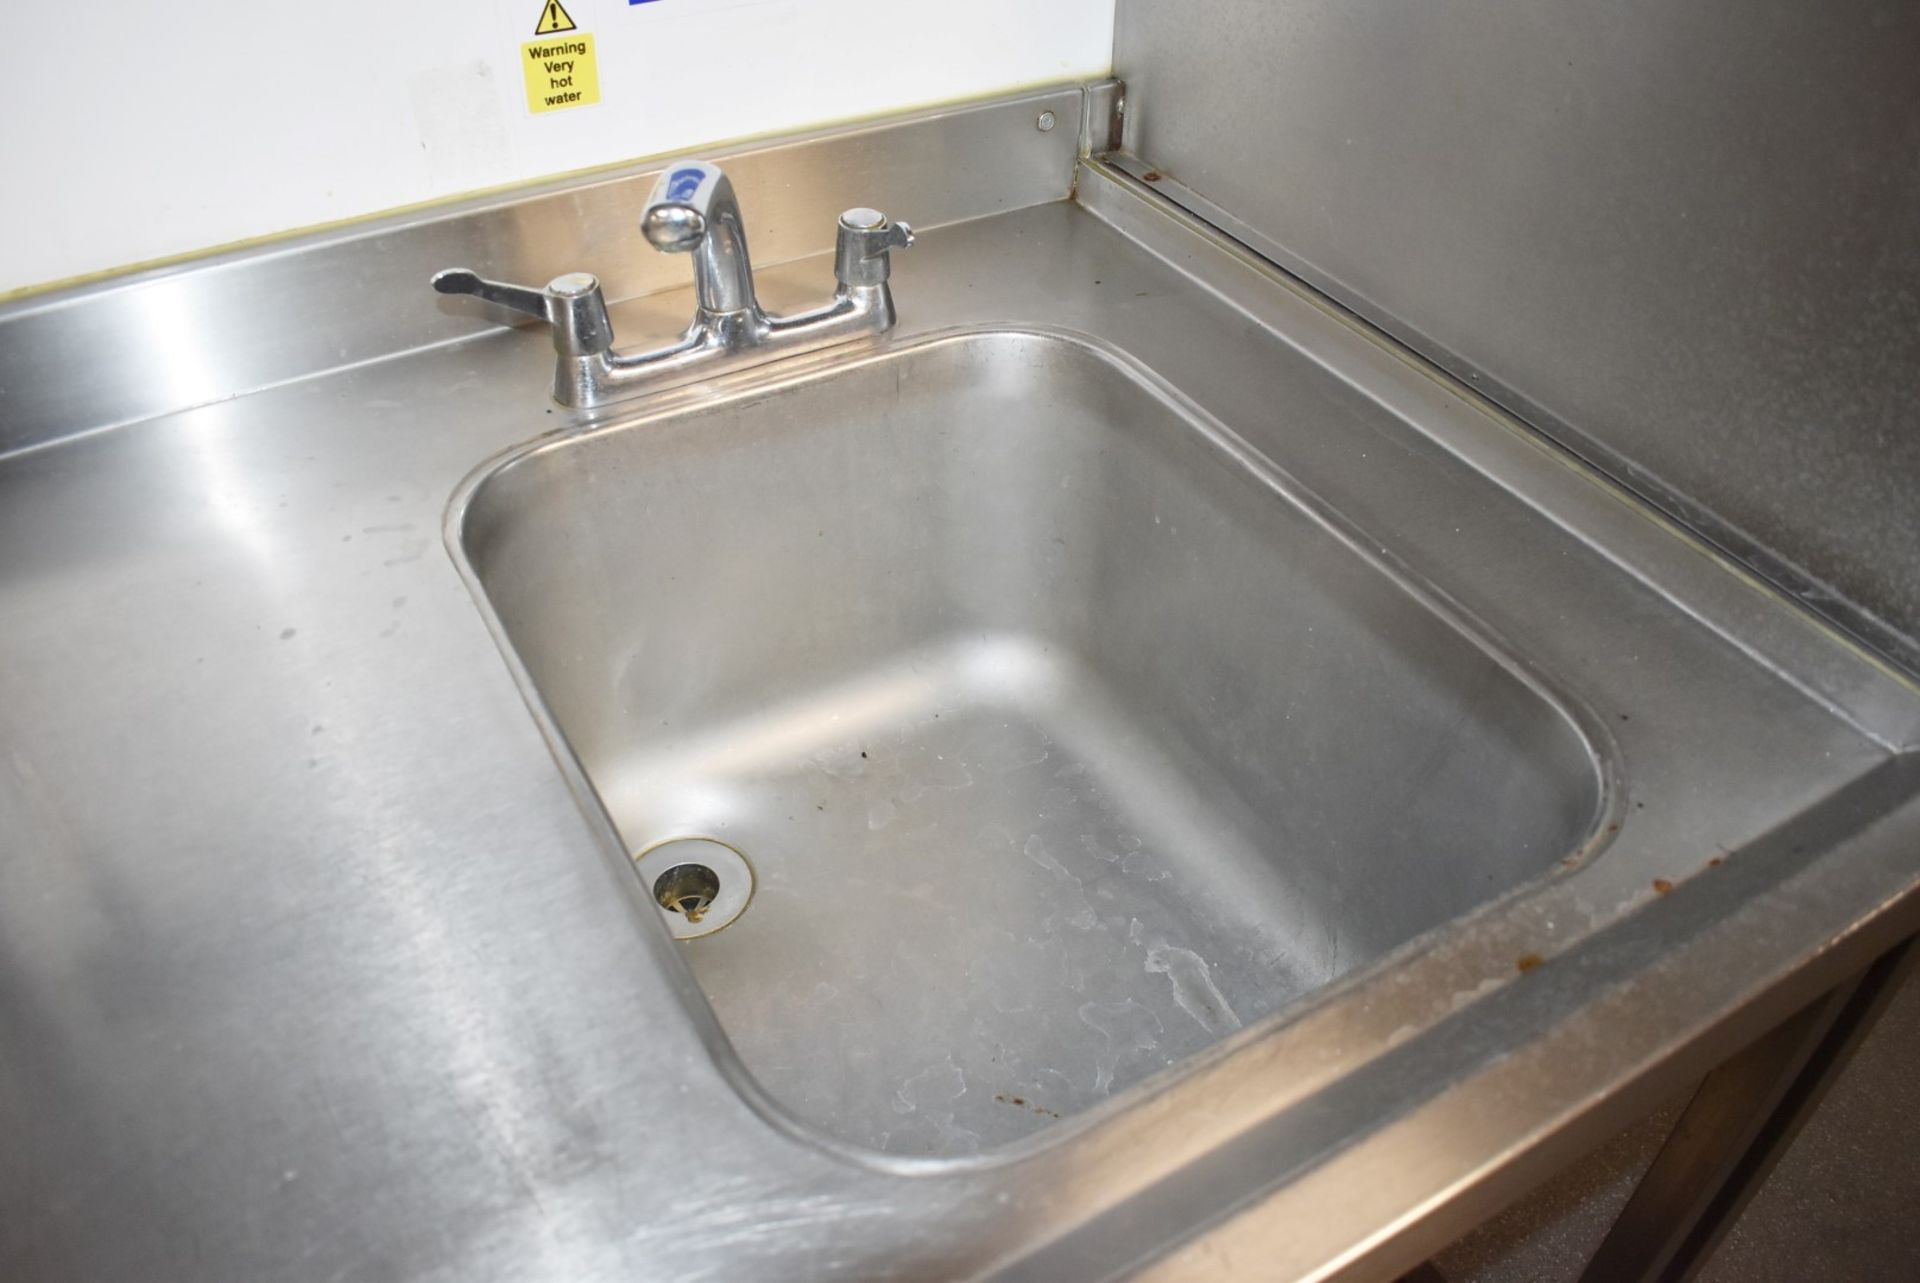 1 x Commercial Wash Unit With Large Sink Bowl, Mixer Tap, Undershelf, Upstand and Anti Spill Surface - Image 2 of 6